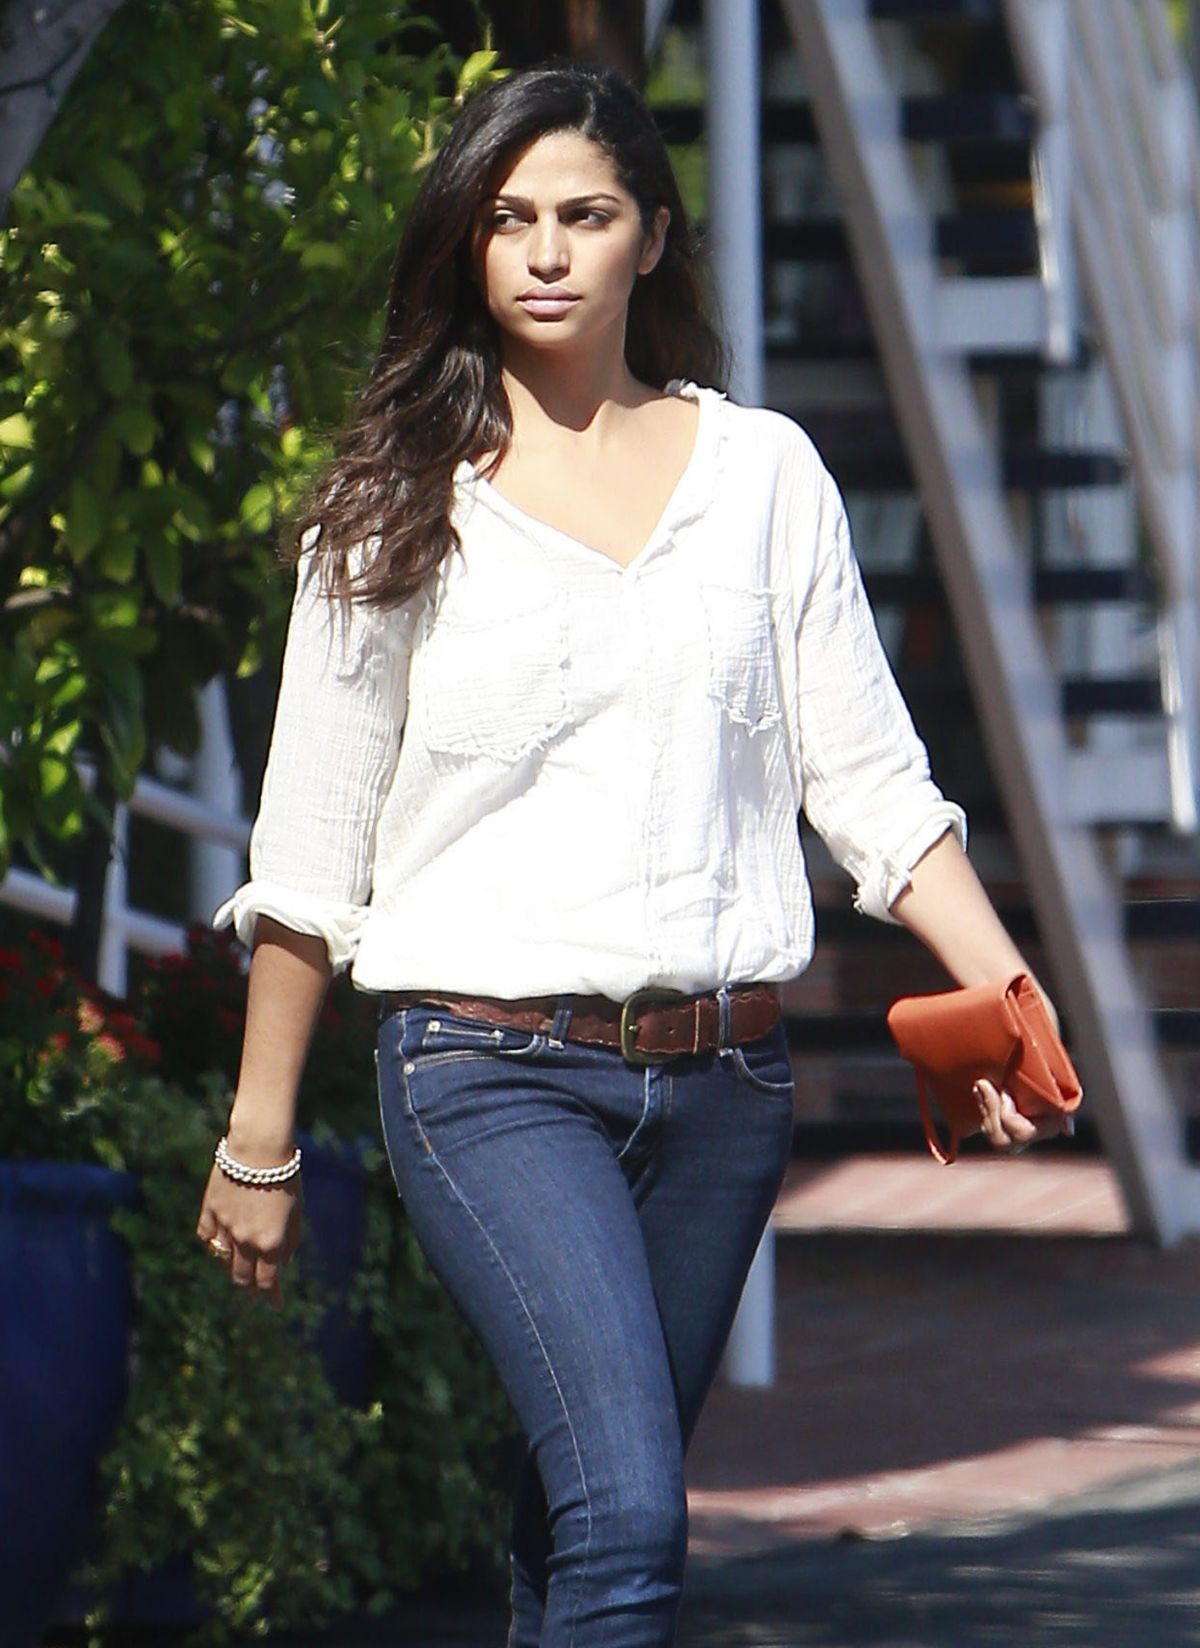 CAMILA ALVES Out and About in West Hollywood 0906